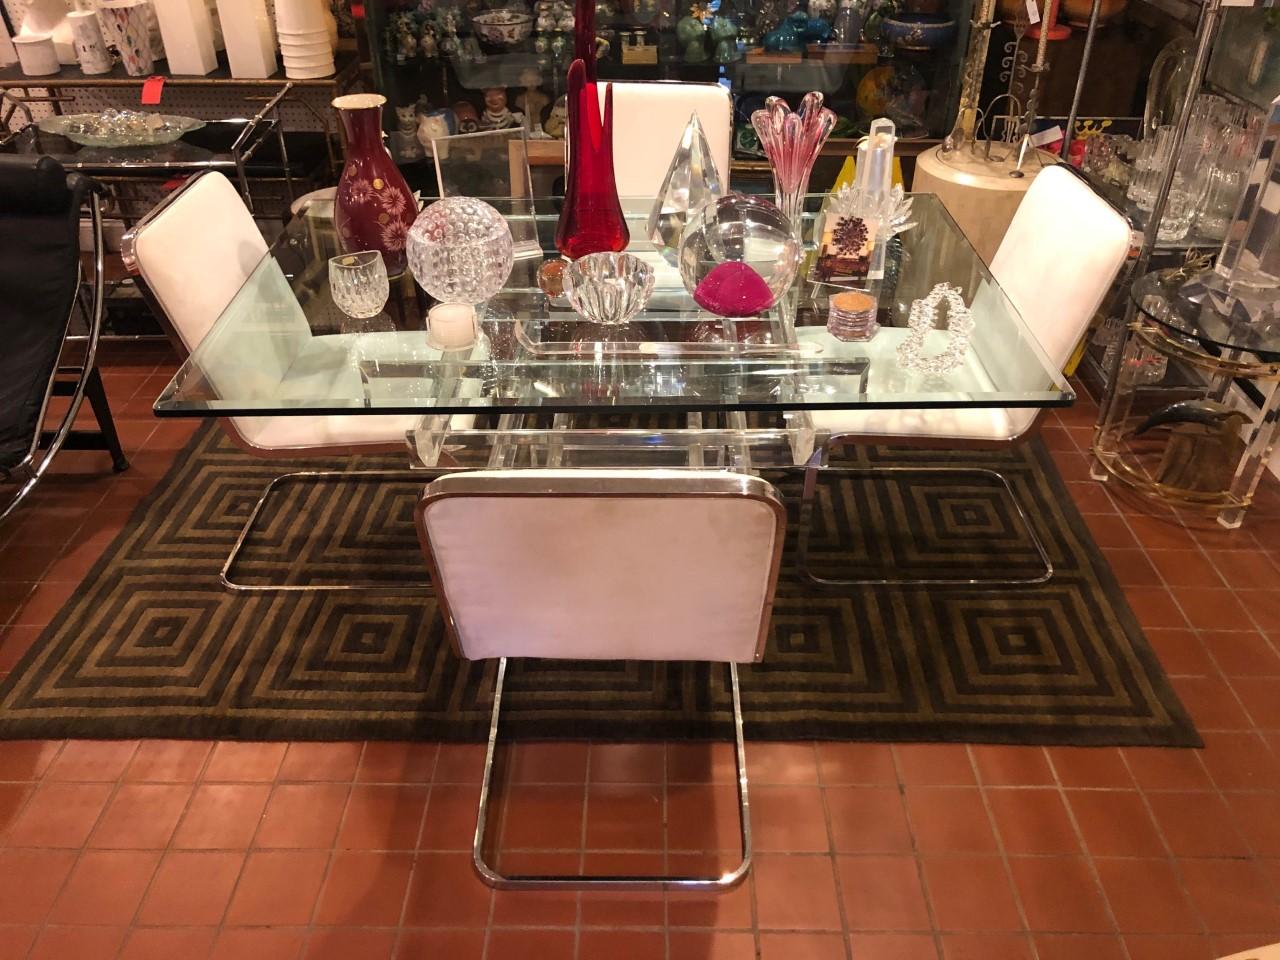  Lucite and glass dining table attributed to Charles Hollis Jones. Amazing mid century stacked Lucite Helix dining table base. An absolutely stunning table.
   